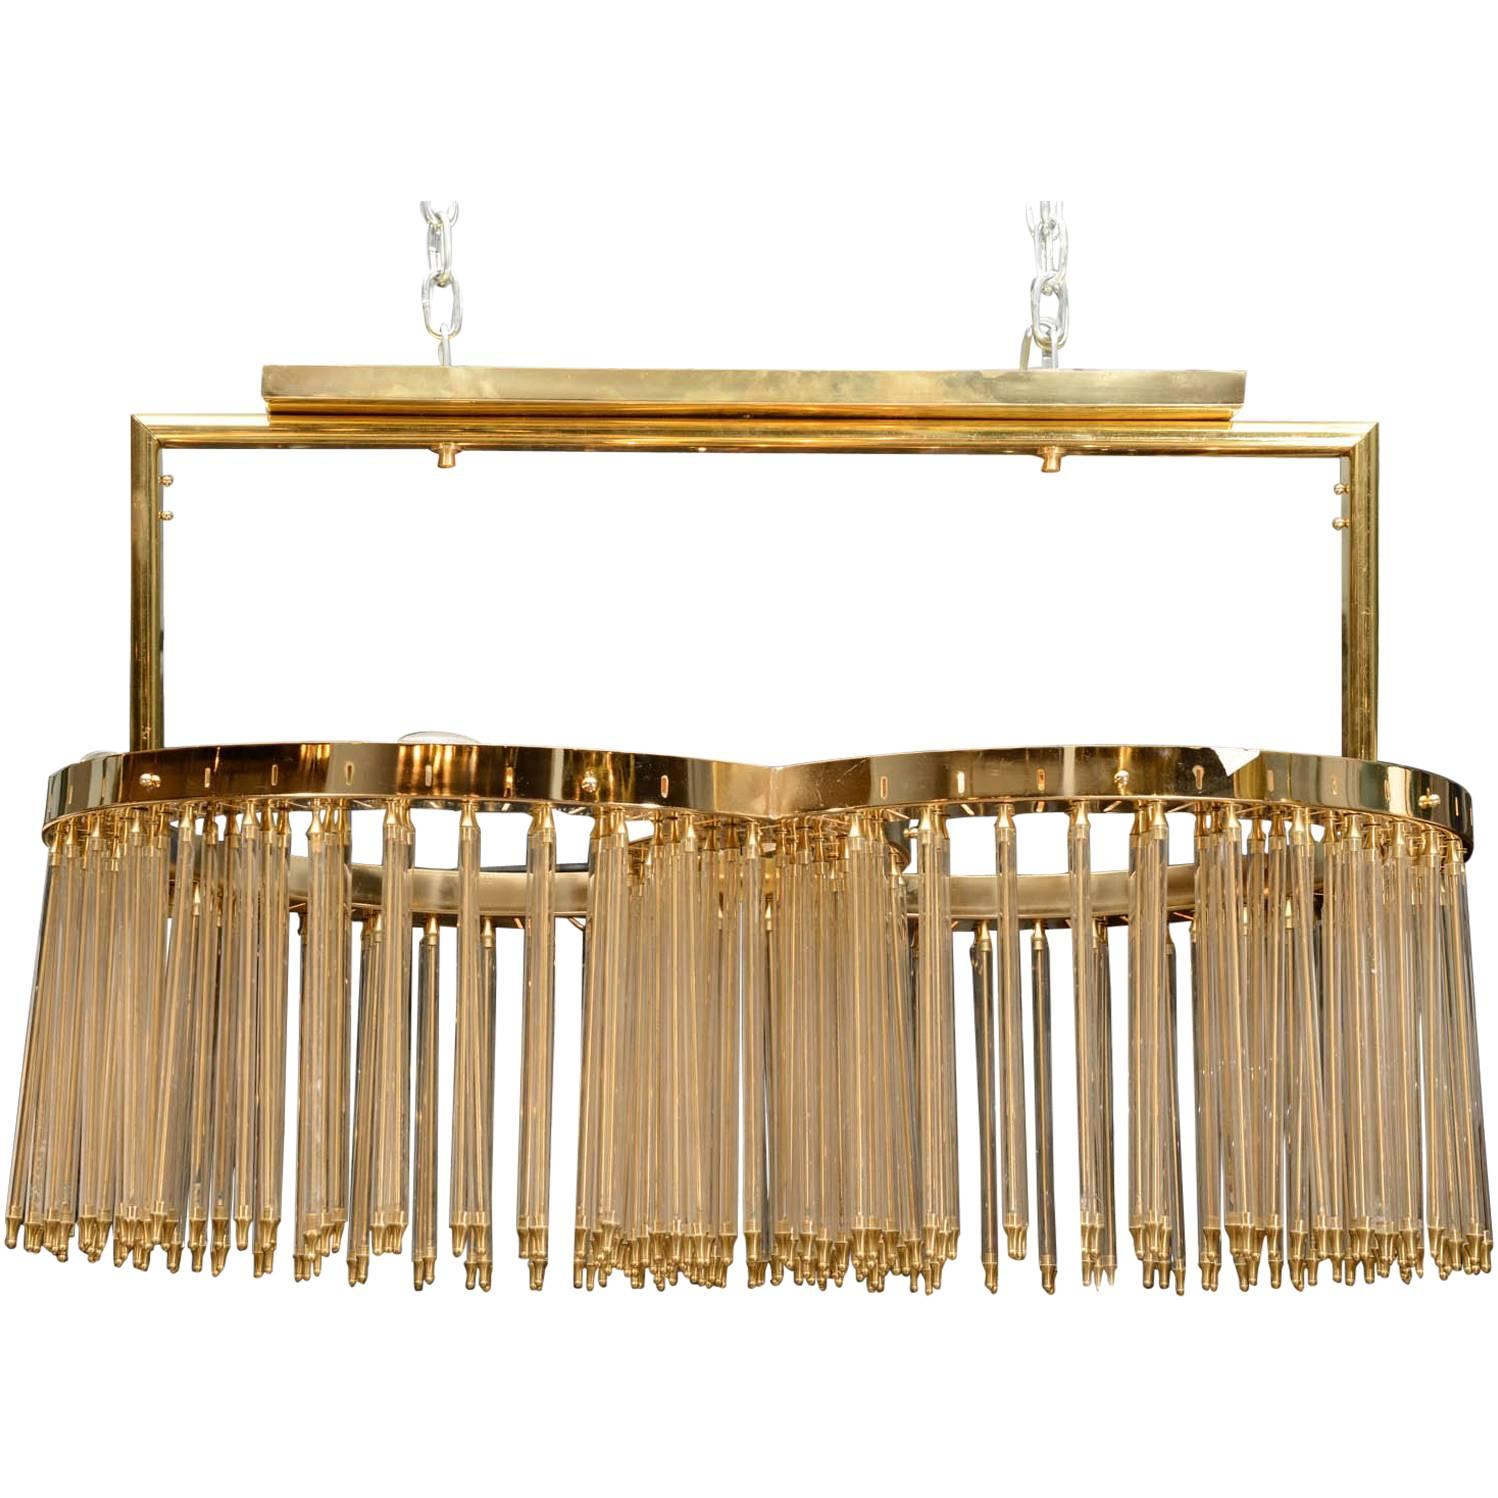 Unique Glustin Luminaires Creation Brass and Glass Rods Chandelier For Sale